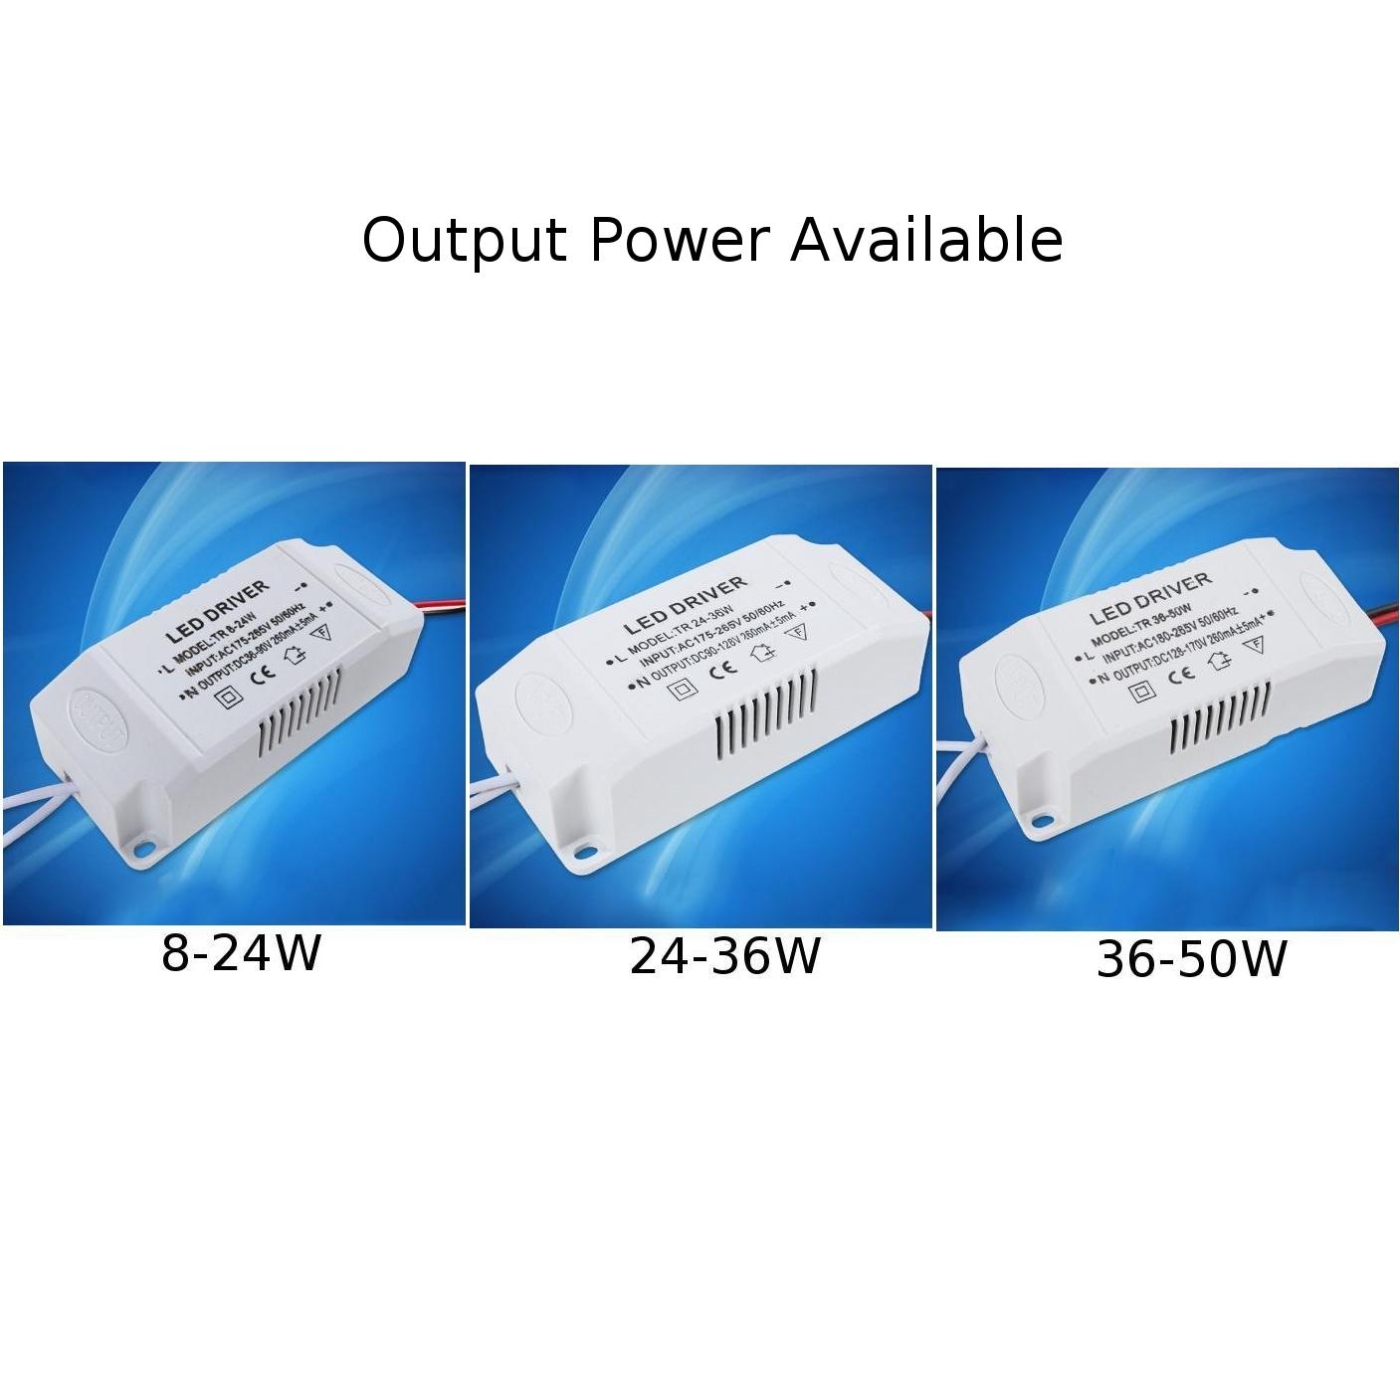 External Power Supply 1 * LED Driver Electronic Transformer Constant Current 12-24W/24-36W/36-50W Lighting Accessories Starters